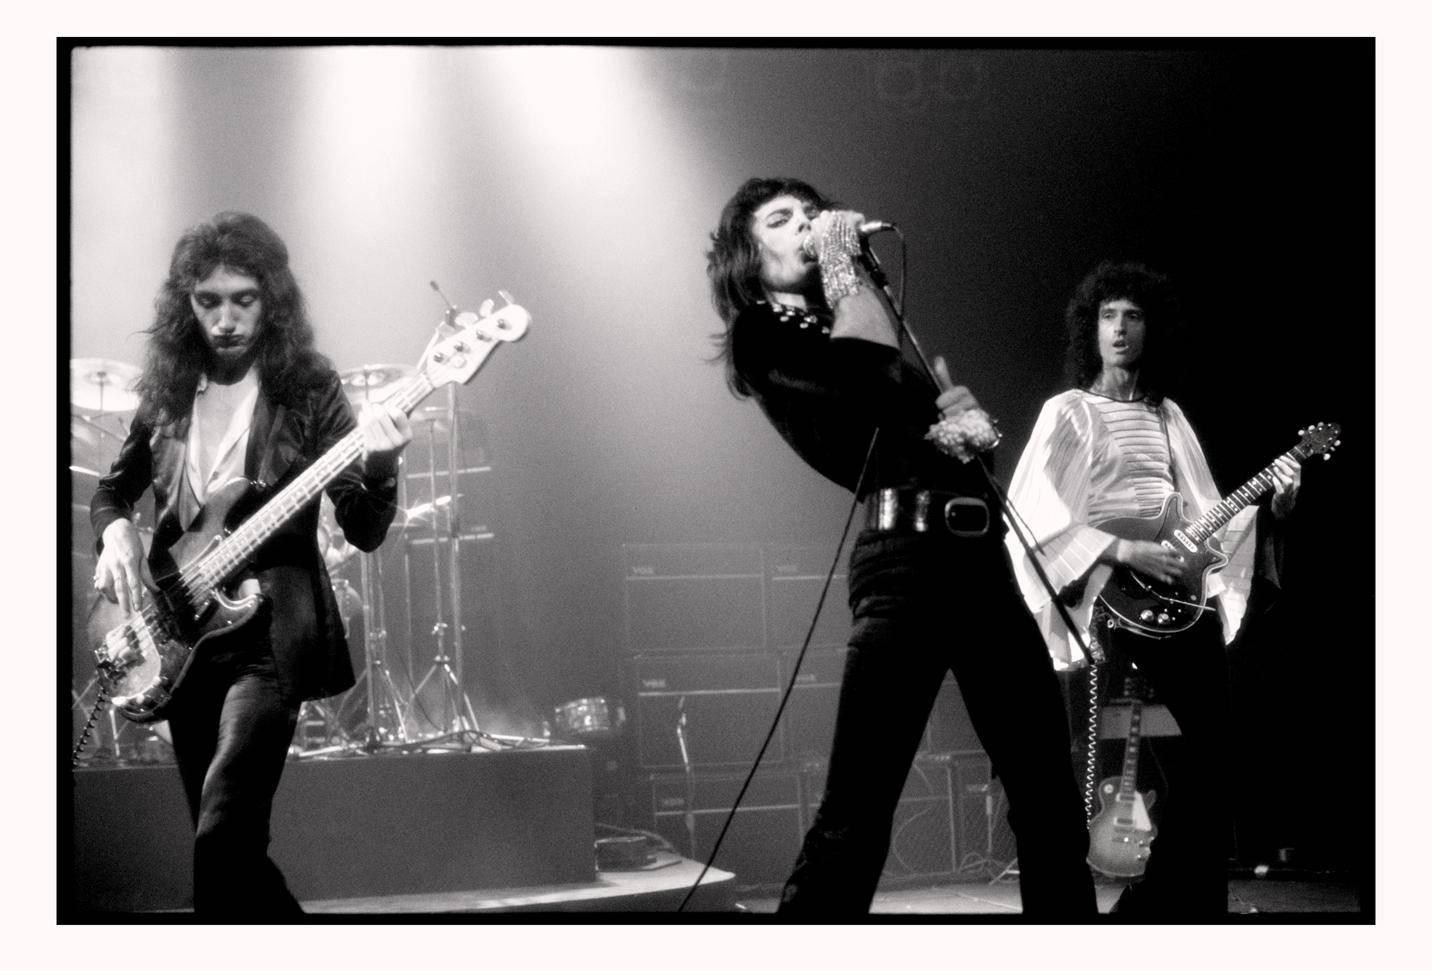 Steve Joester Black and White Photograph - Queen, London, 1976